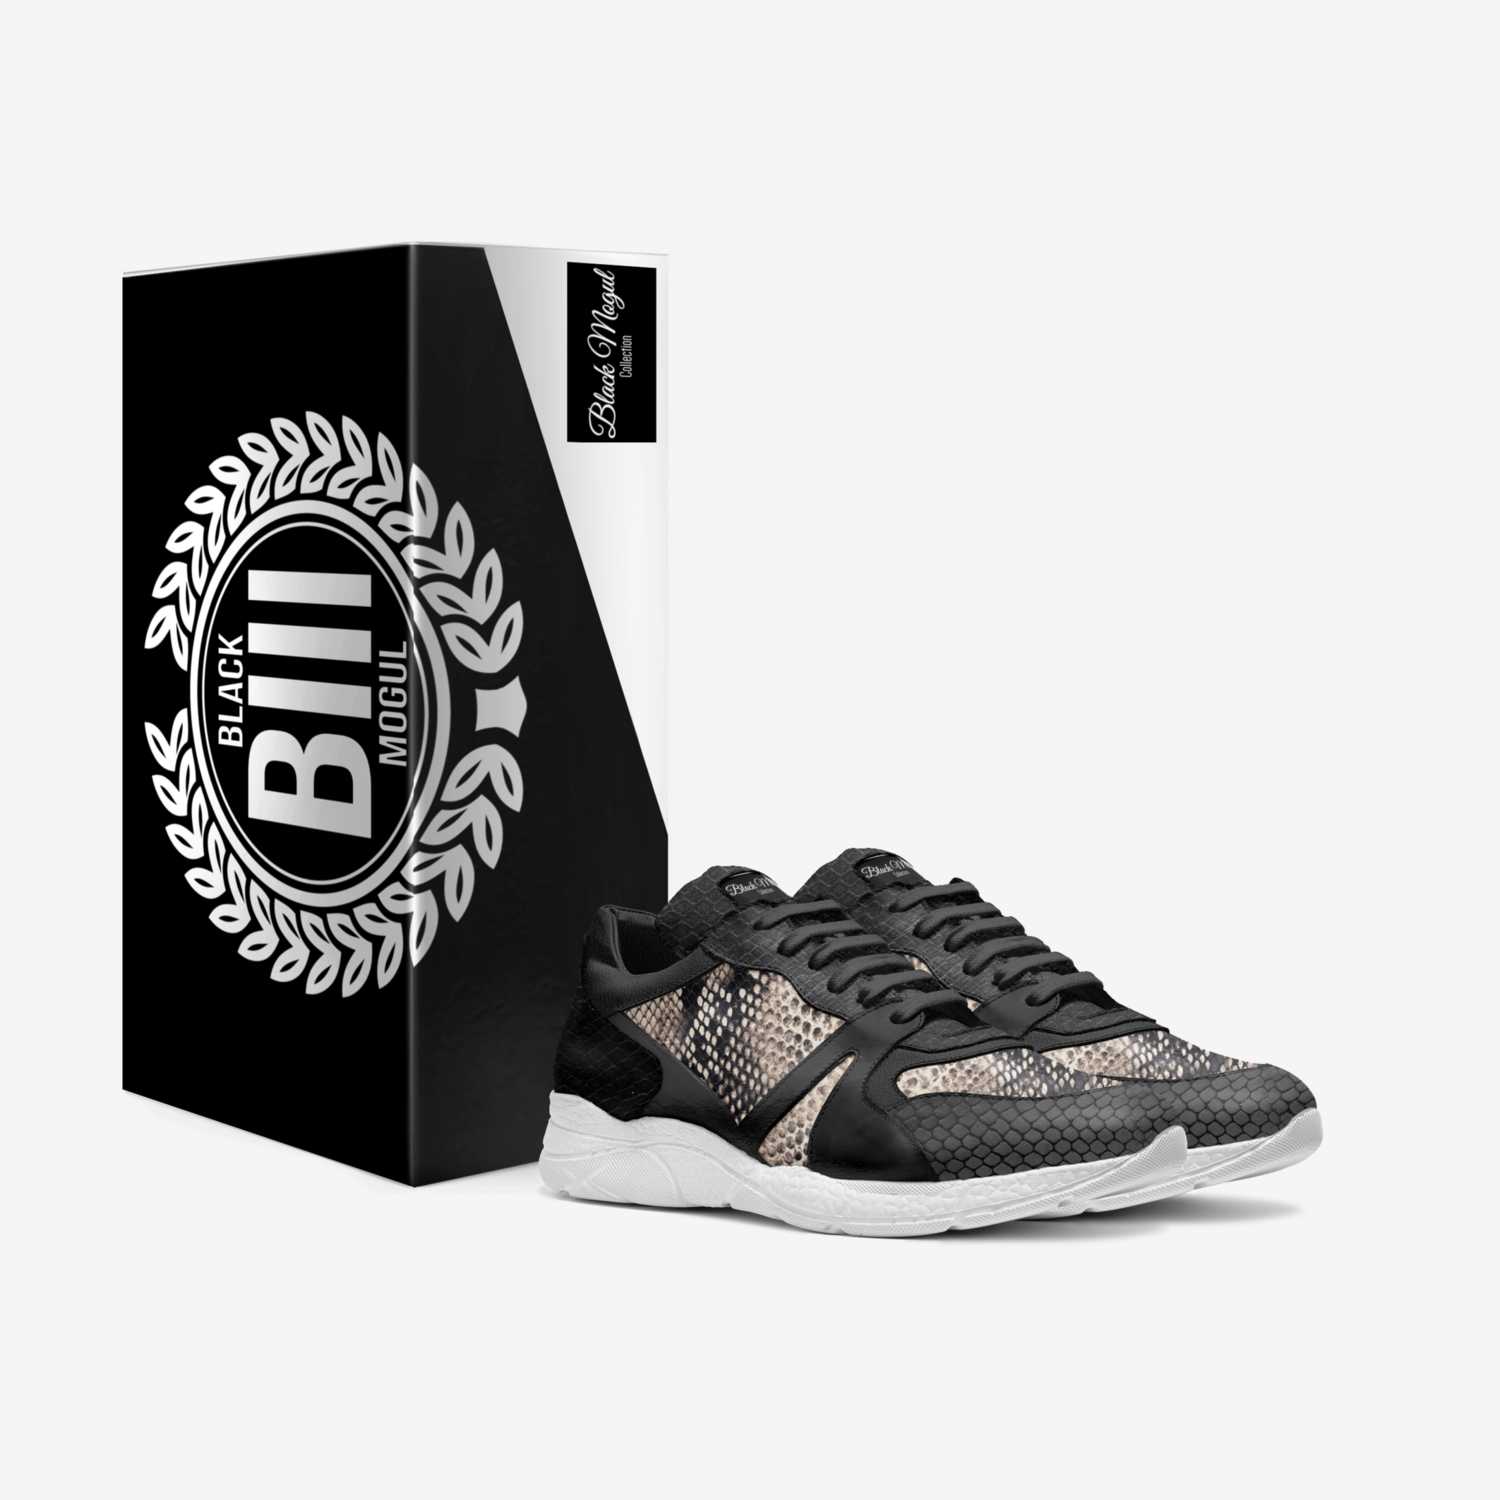 MOGUL CRX TRAINER custom made in Italy shoes by Black Mogul Collection | Box view